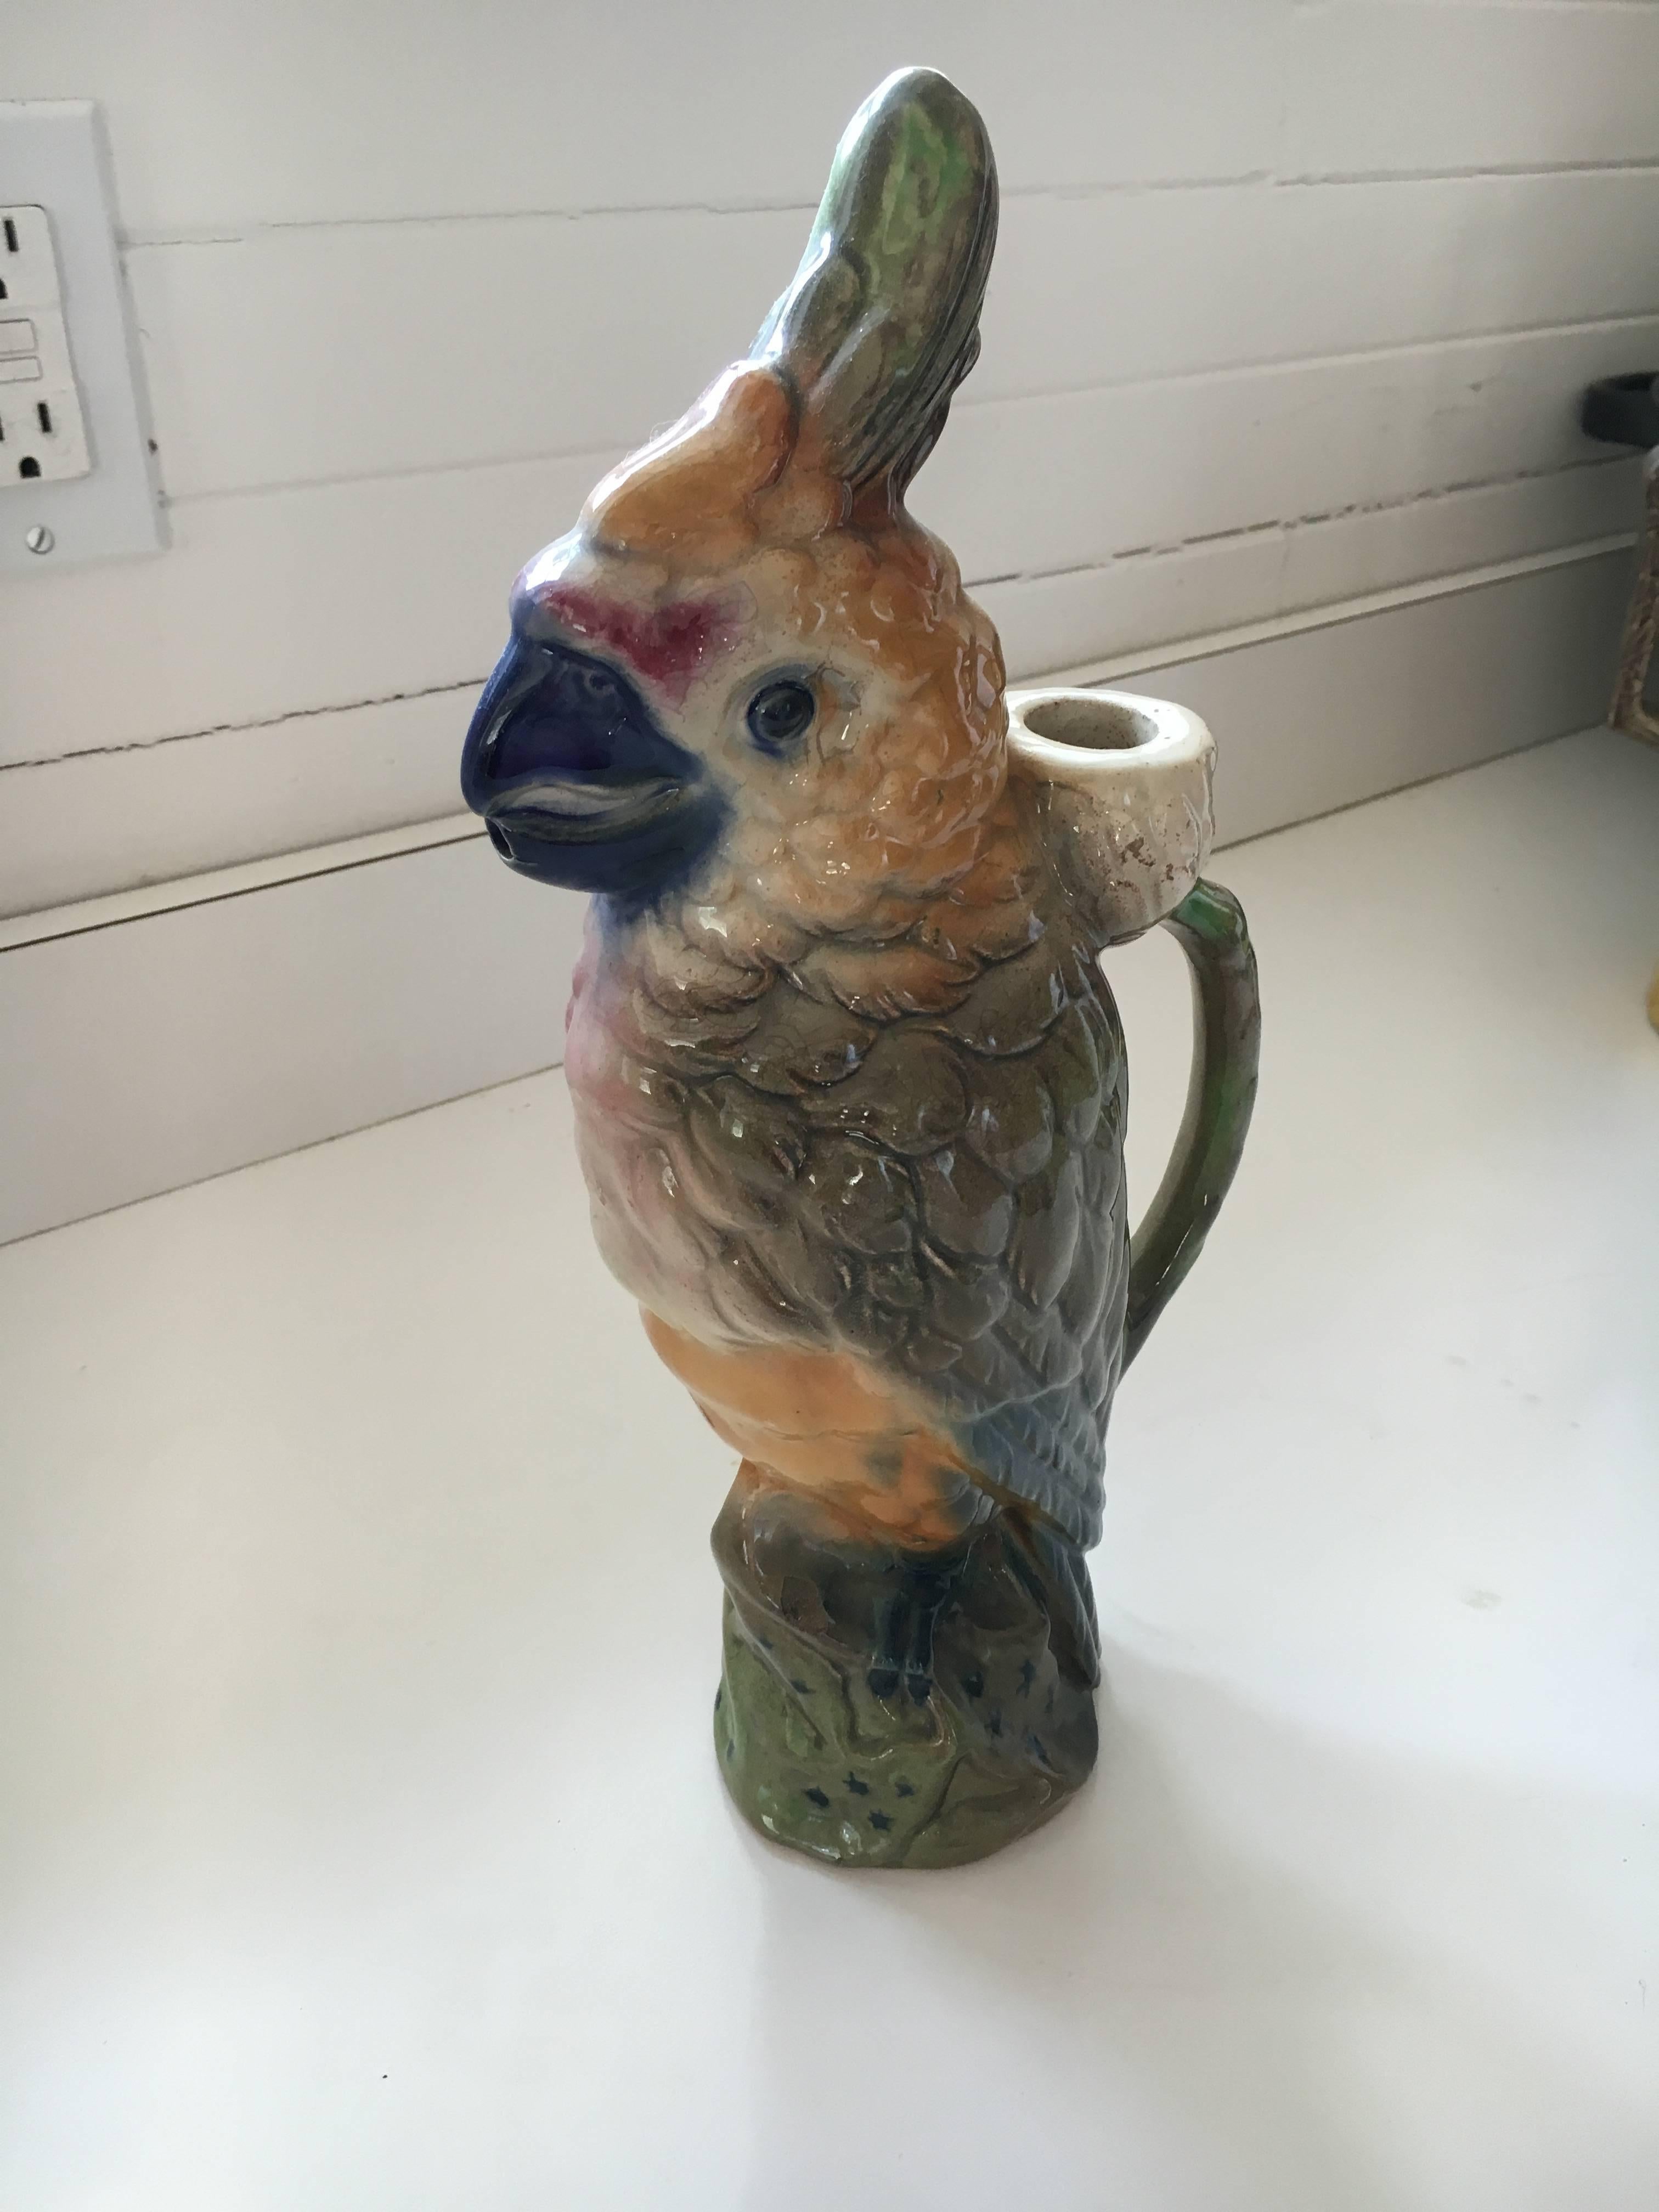 Mid-19th century lovely Majolica pitcher in the shape of a parrot. Makers mark is St. Clement on bottom and stamped 